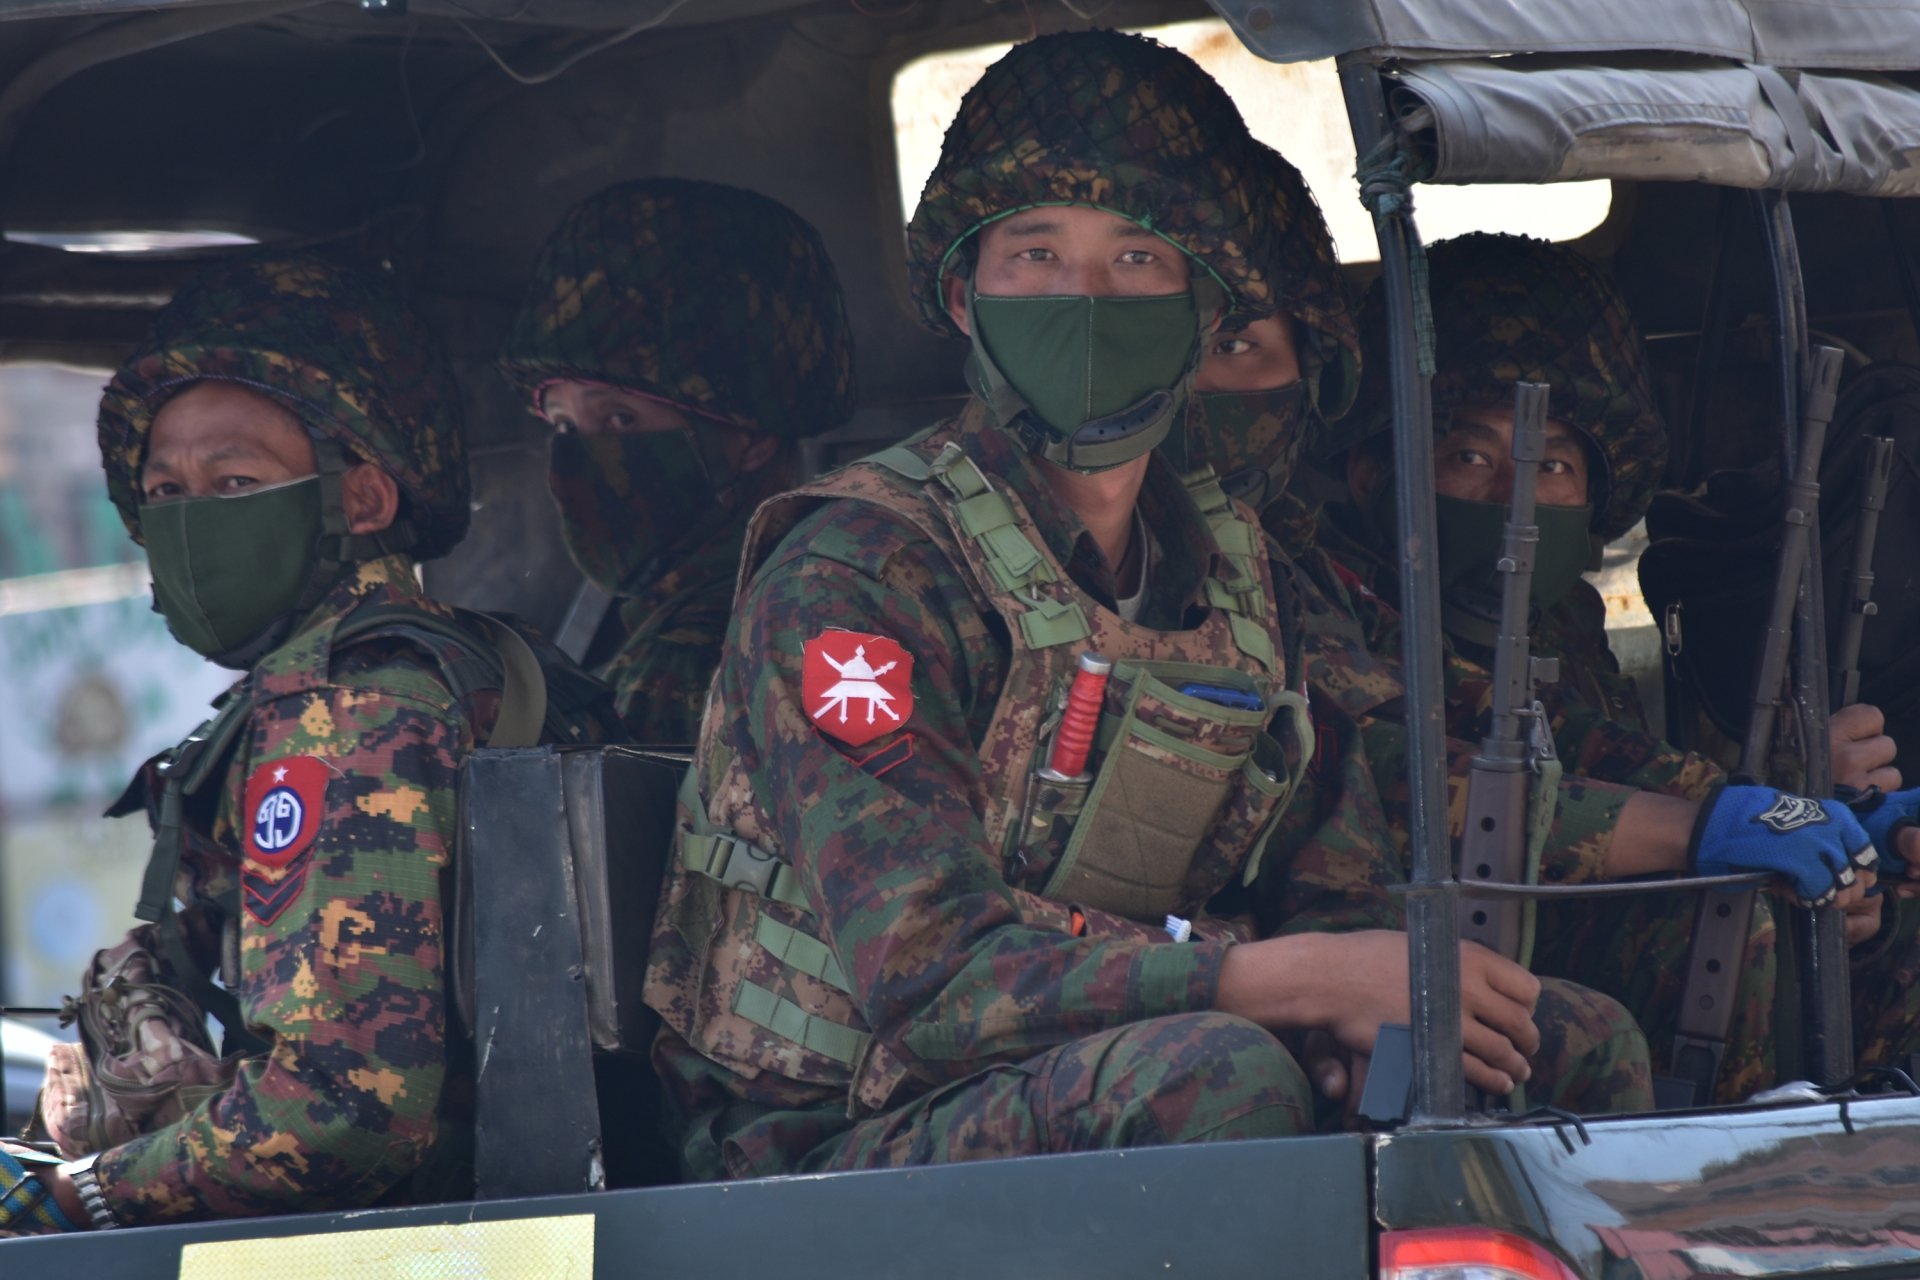 Soldiers in uniforms and masks sitting on a truck.